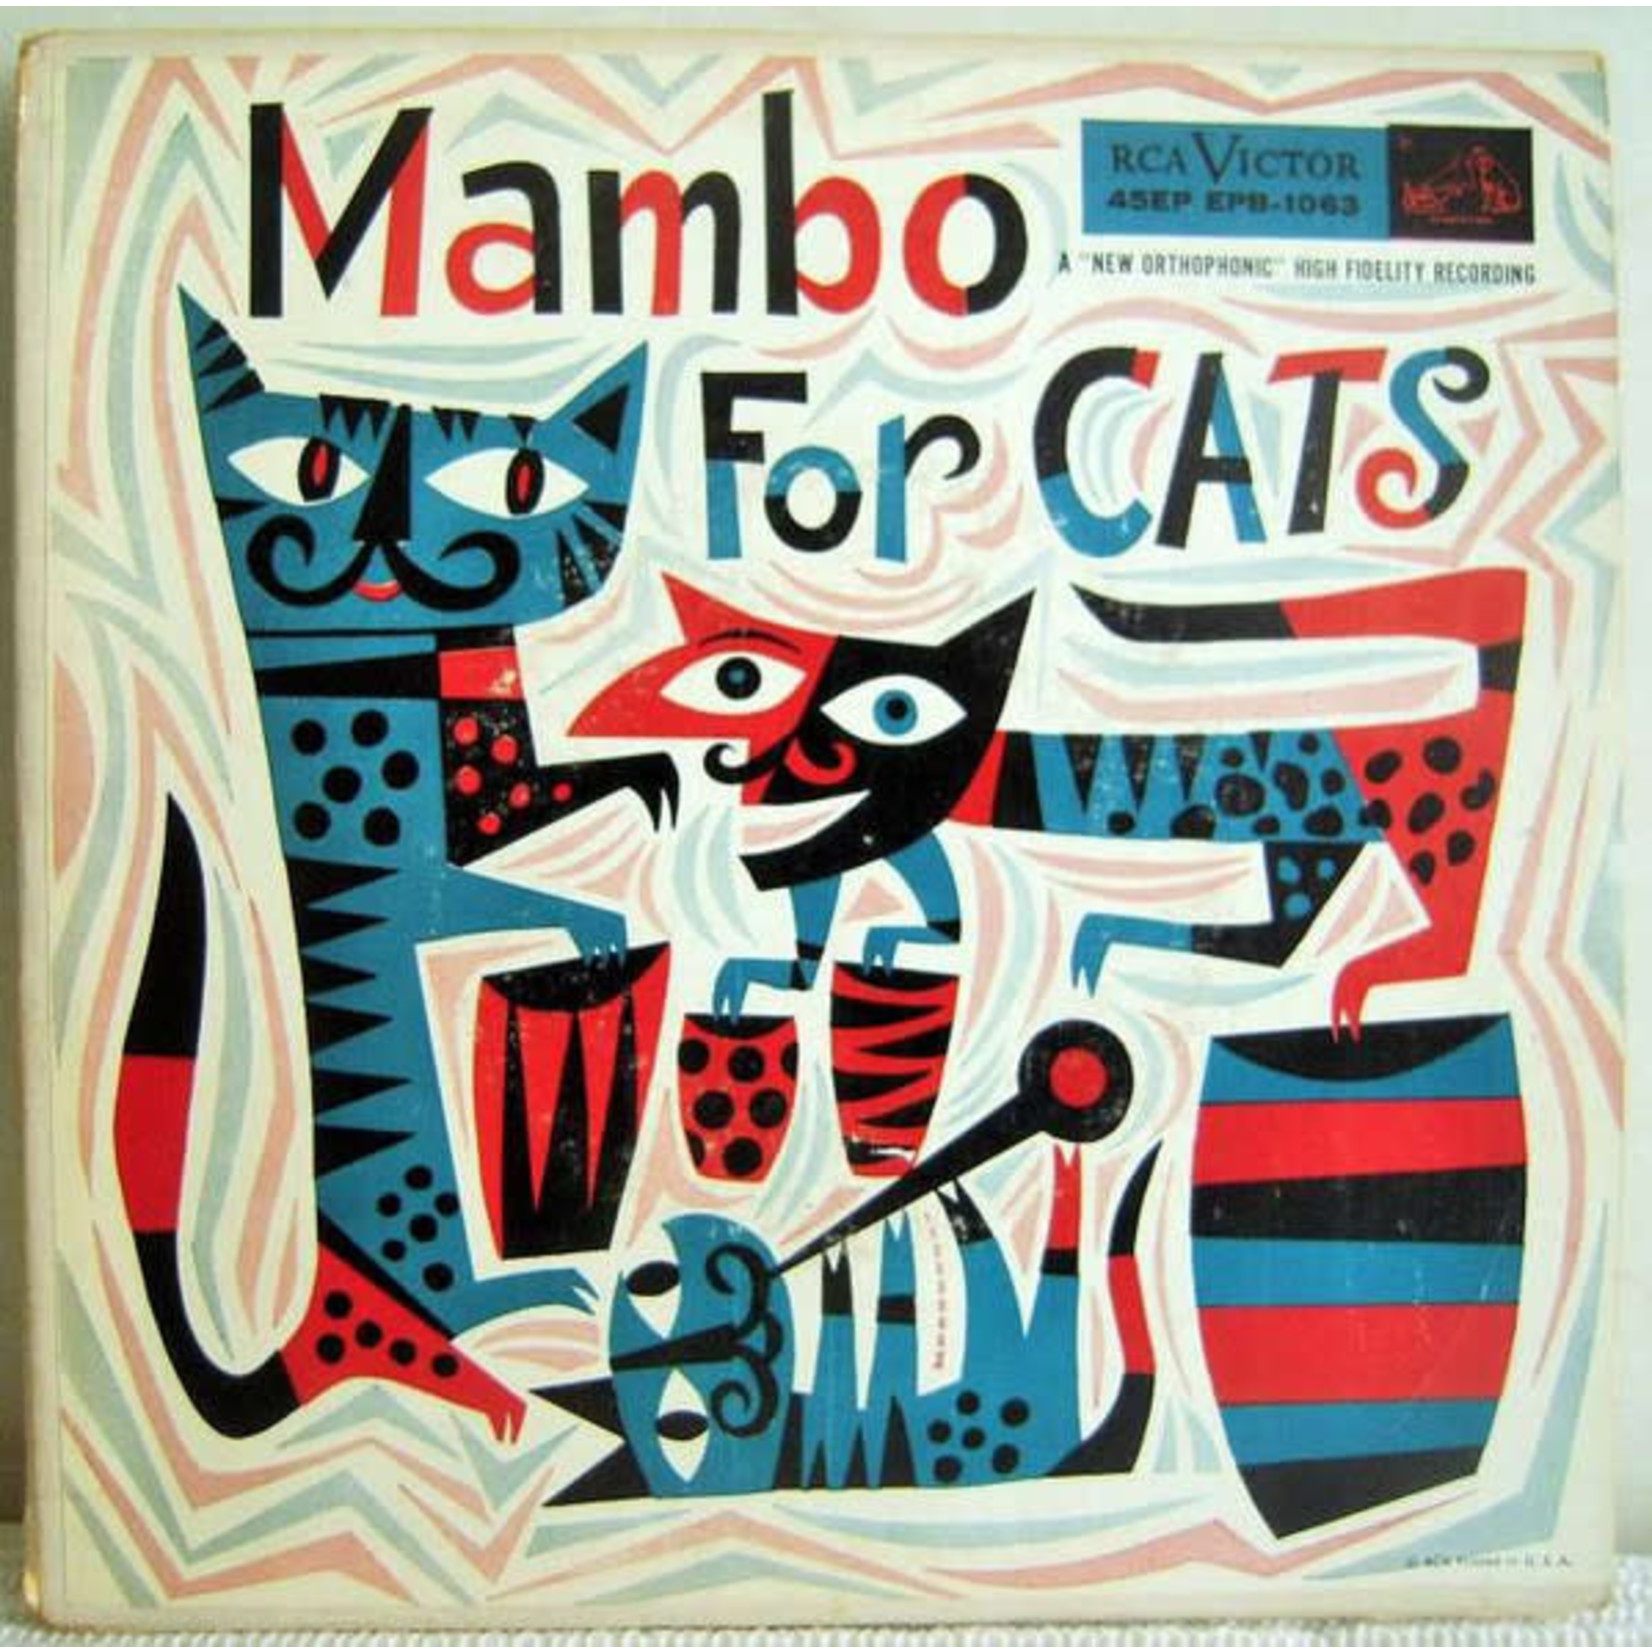 RCA V/A - Mambo for Cats (2x7") {G+/G+}